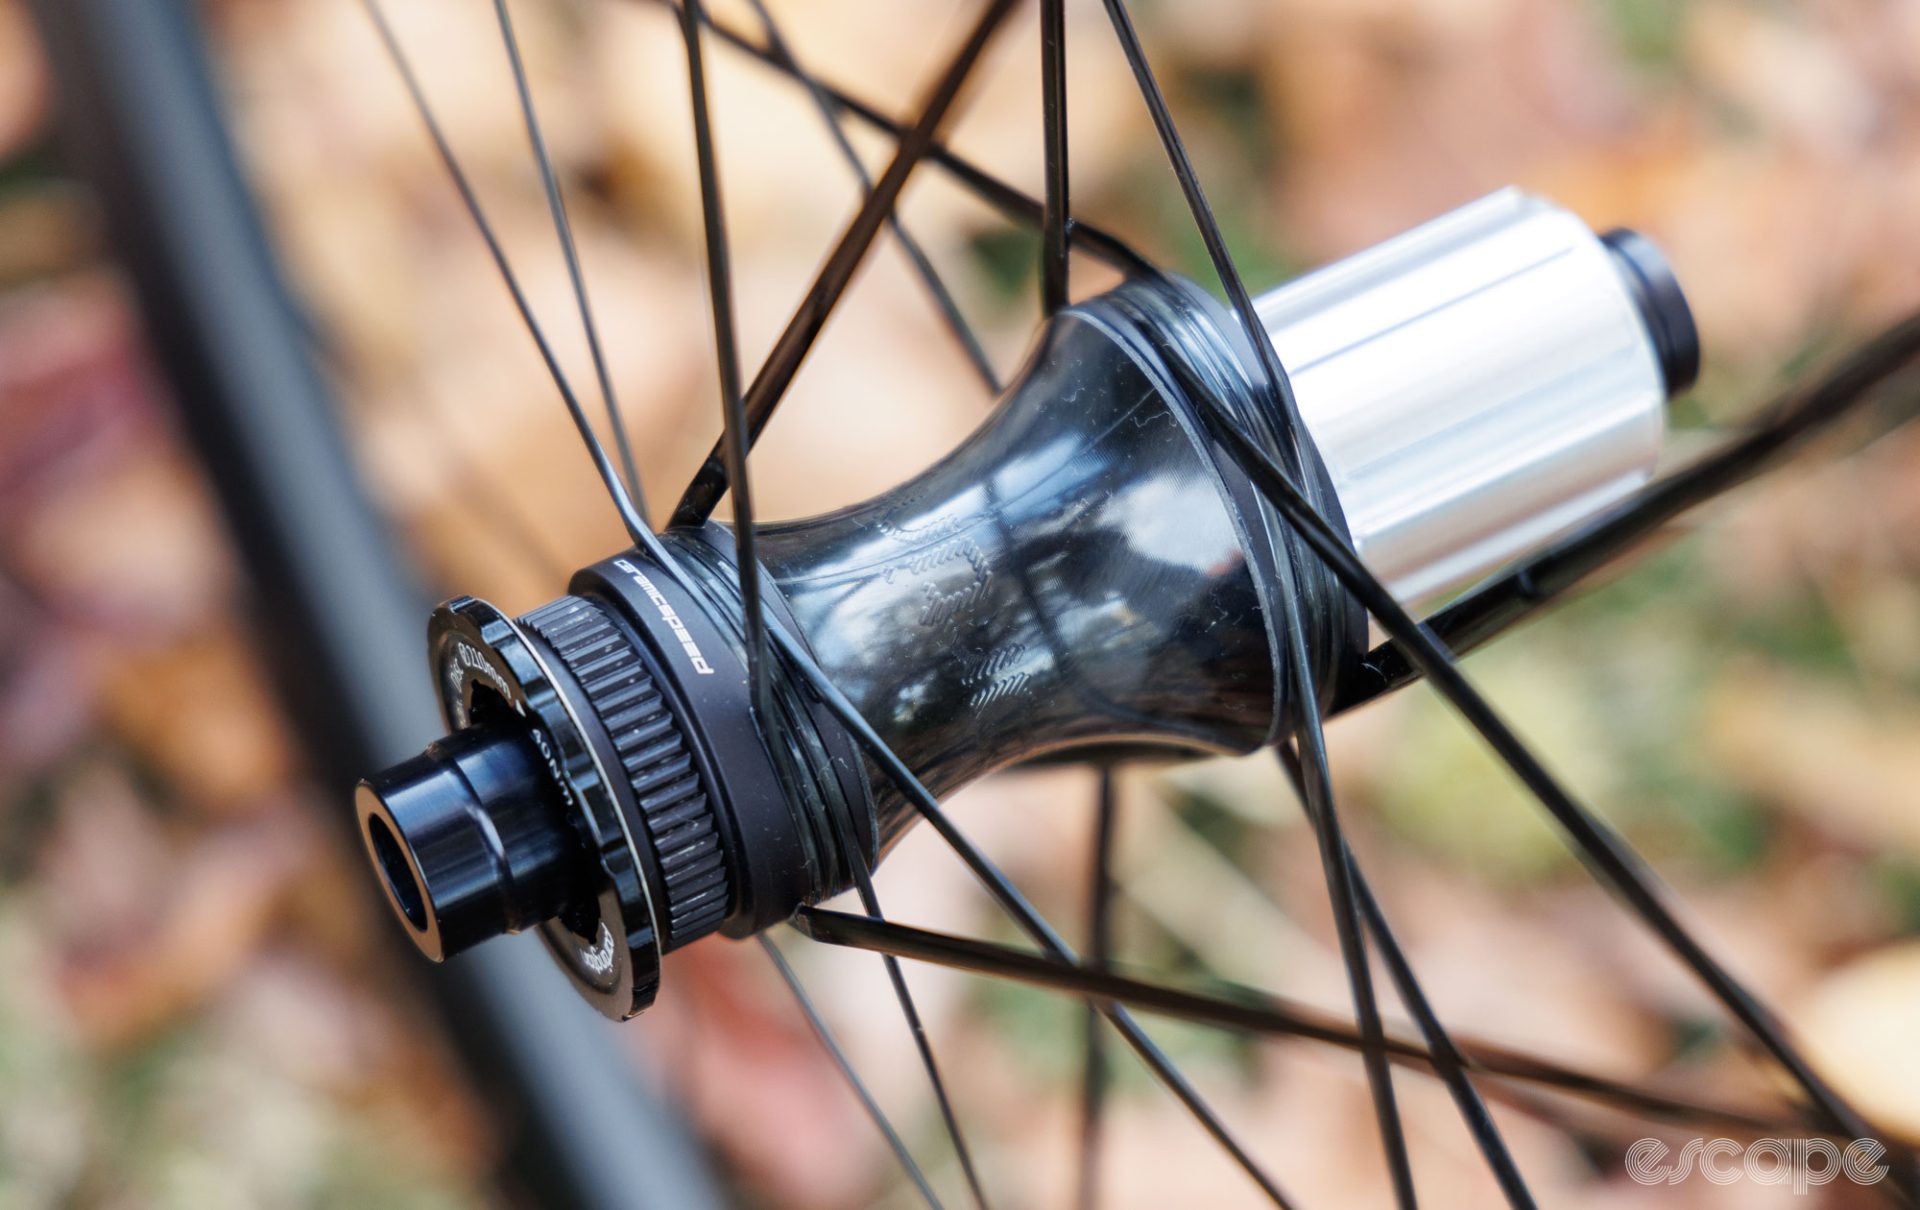 The rear hub of the Partington MKII. The spokes wrap into a notch in the flanges that, under tension, keep the wheel mechanically stable even if the resin bond fails.